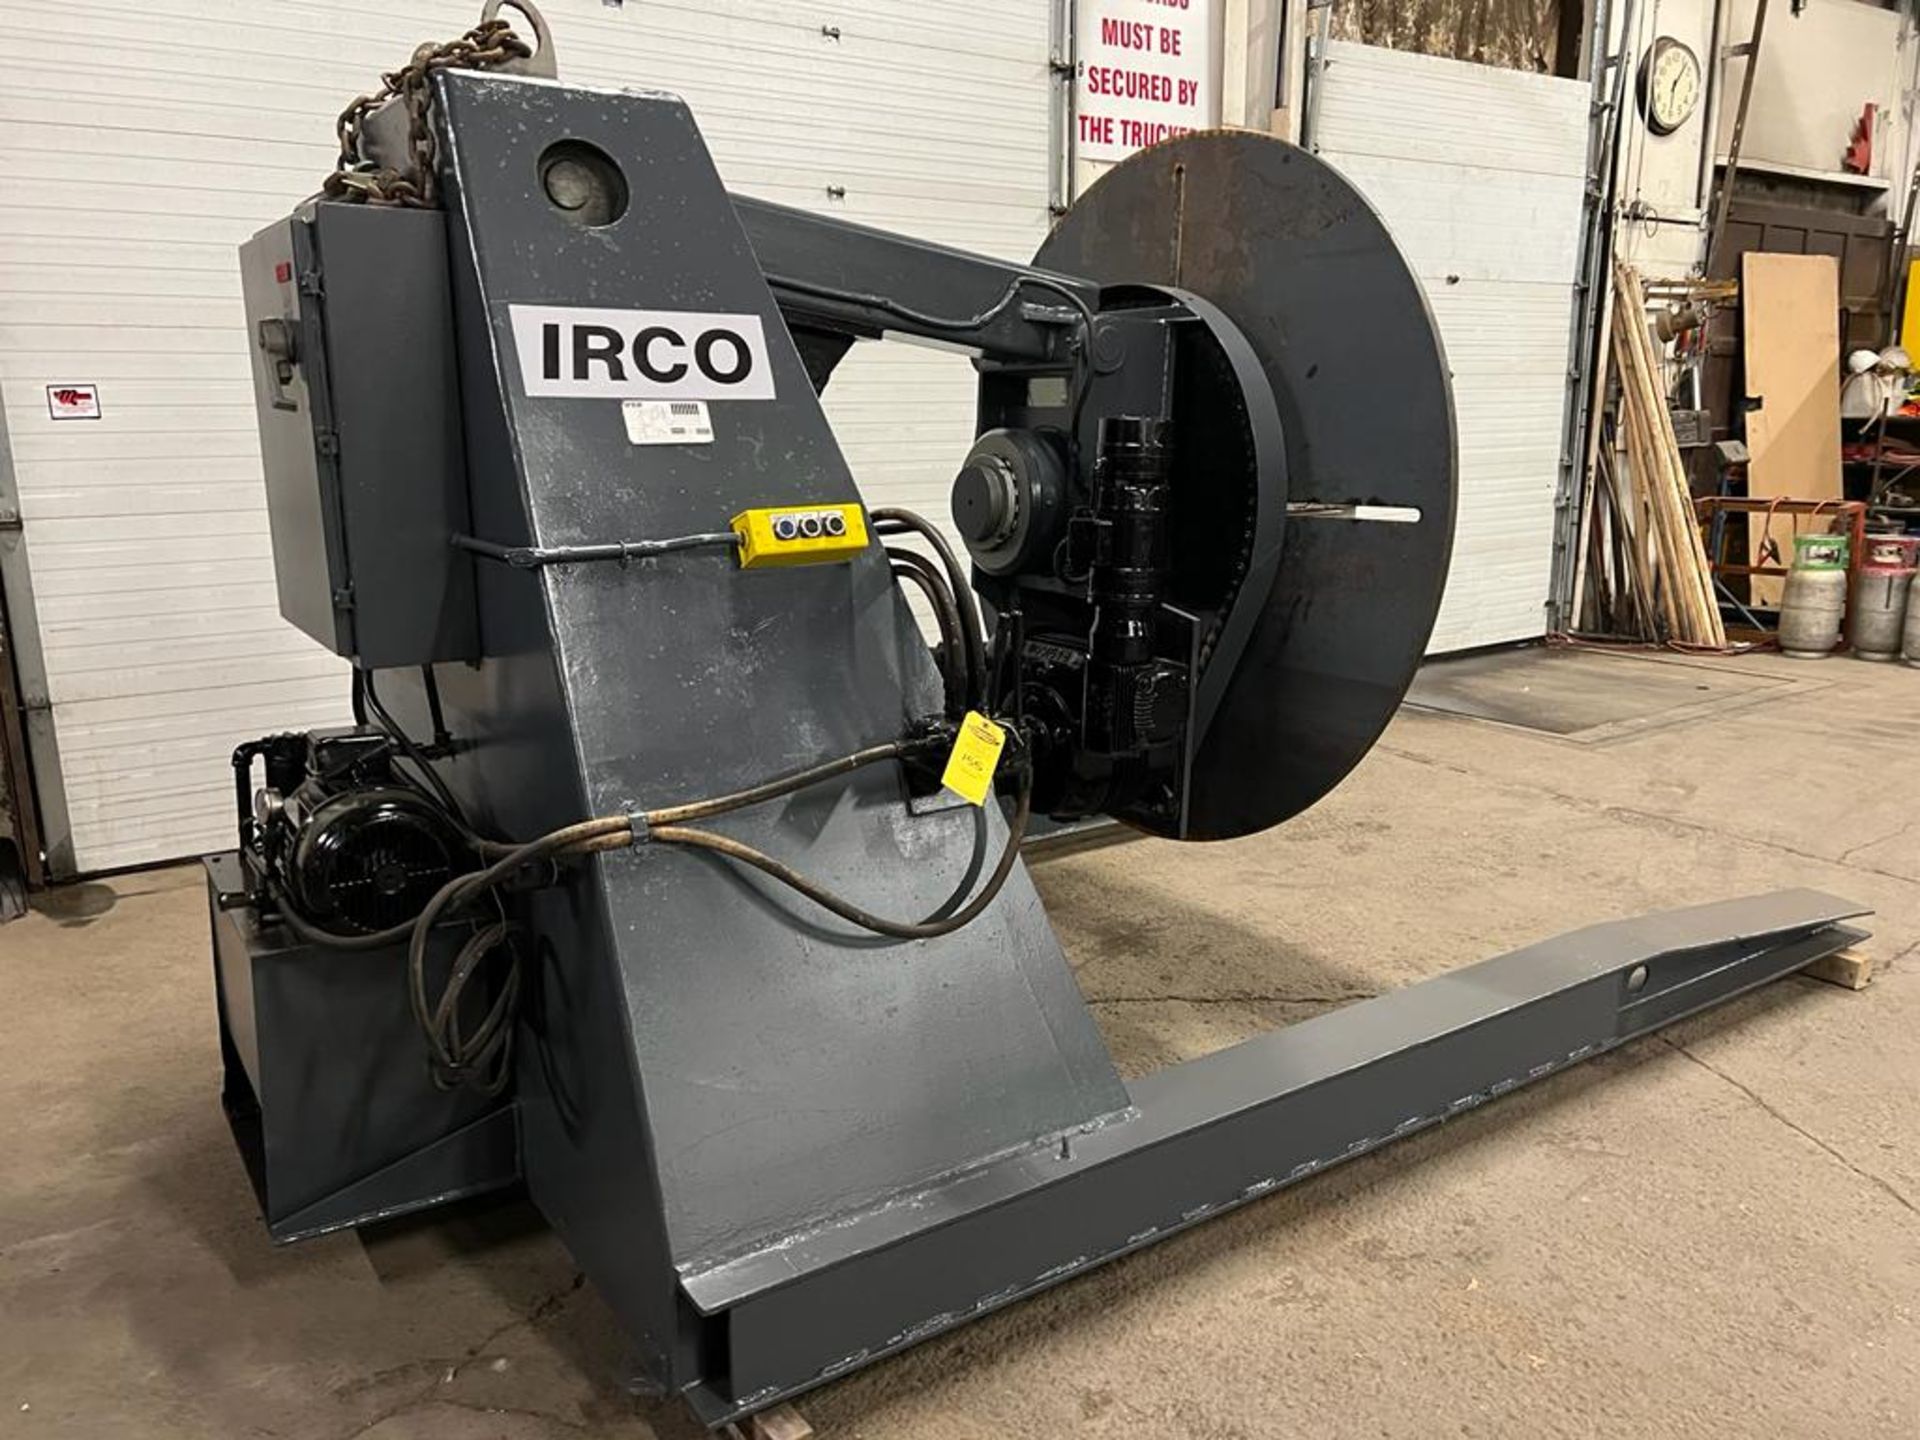 IRCO 16,000lbs Capacity Welding Positioner TILT and ROTATE model 6-16 with pendant controller - Image 2 of 5